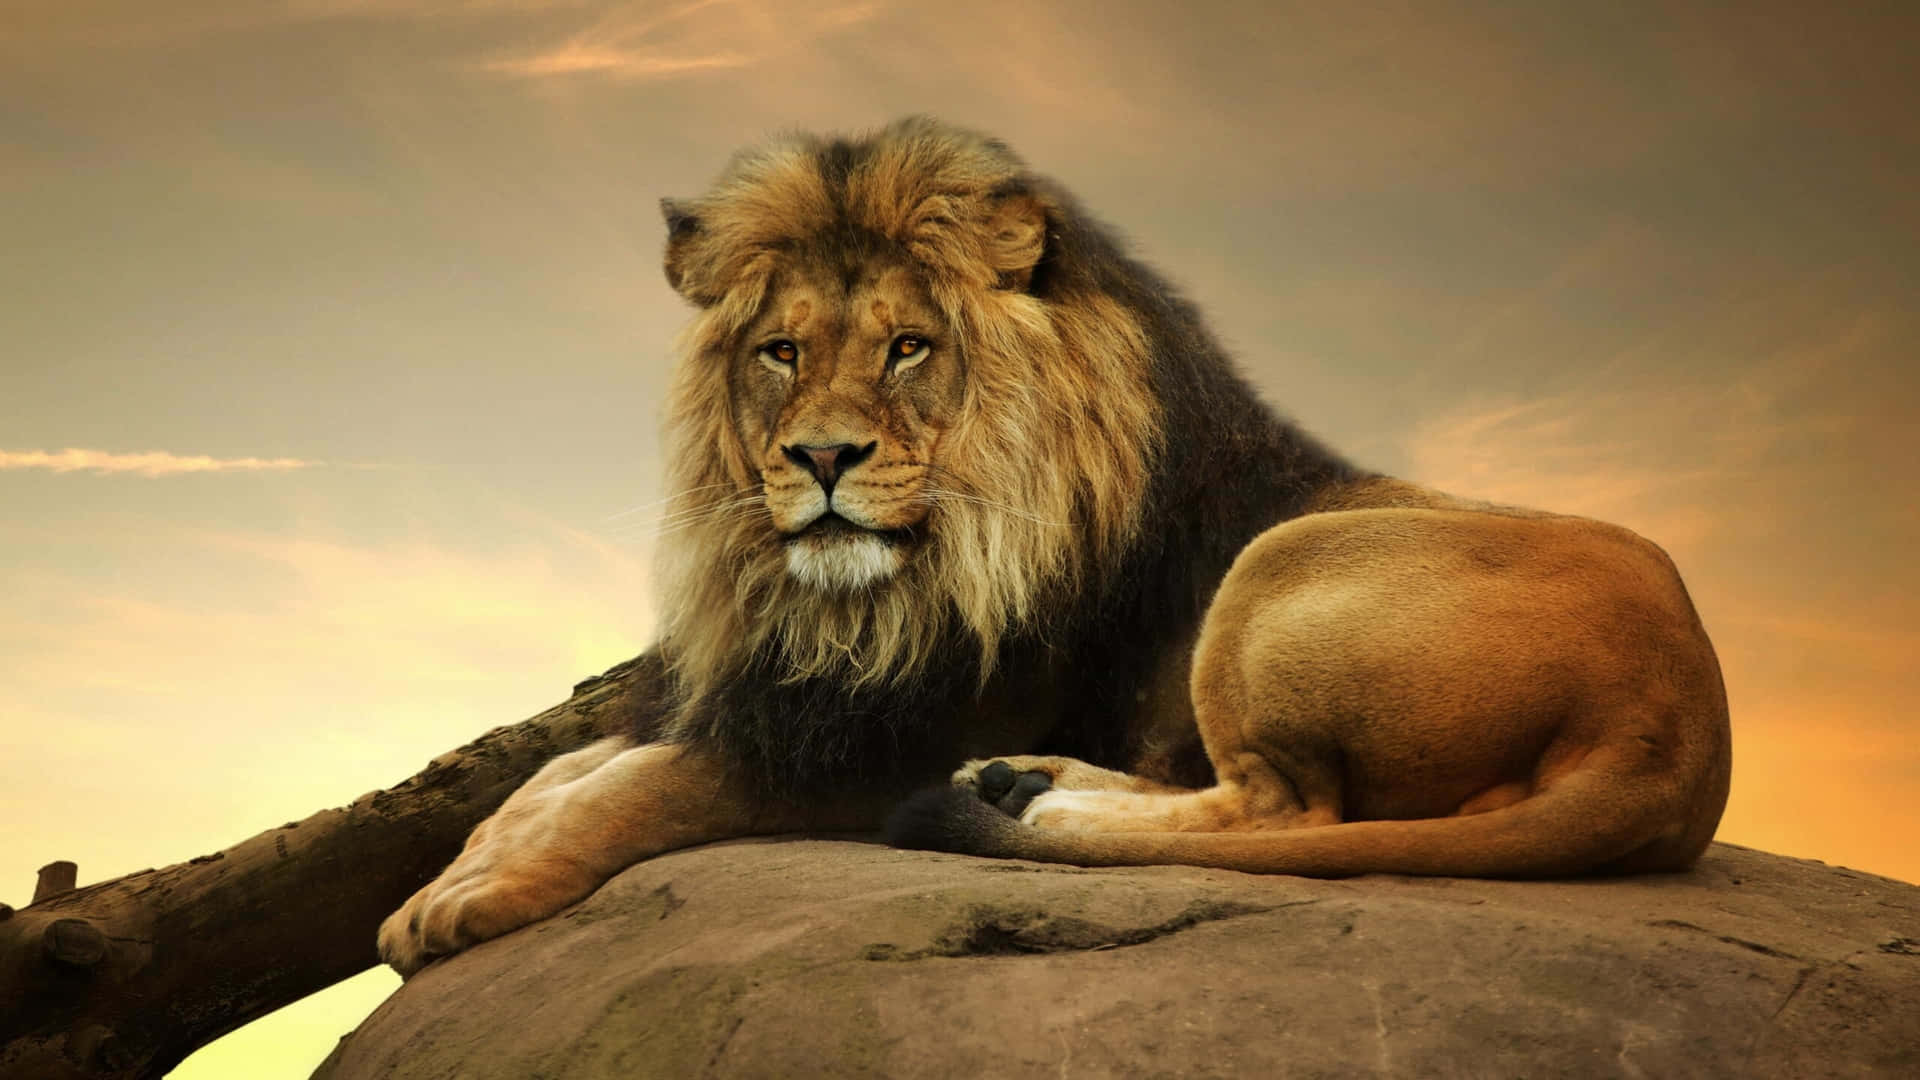 A powerful lion stands with its striking mane blowing in the wind.